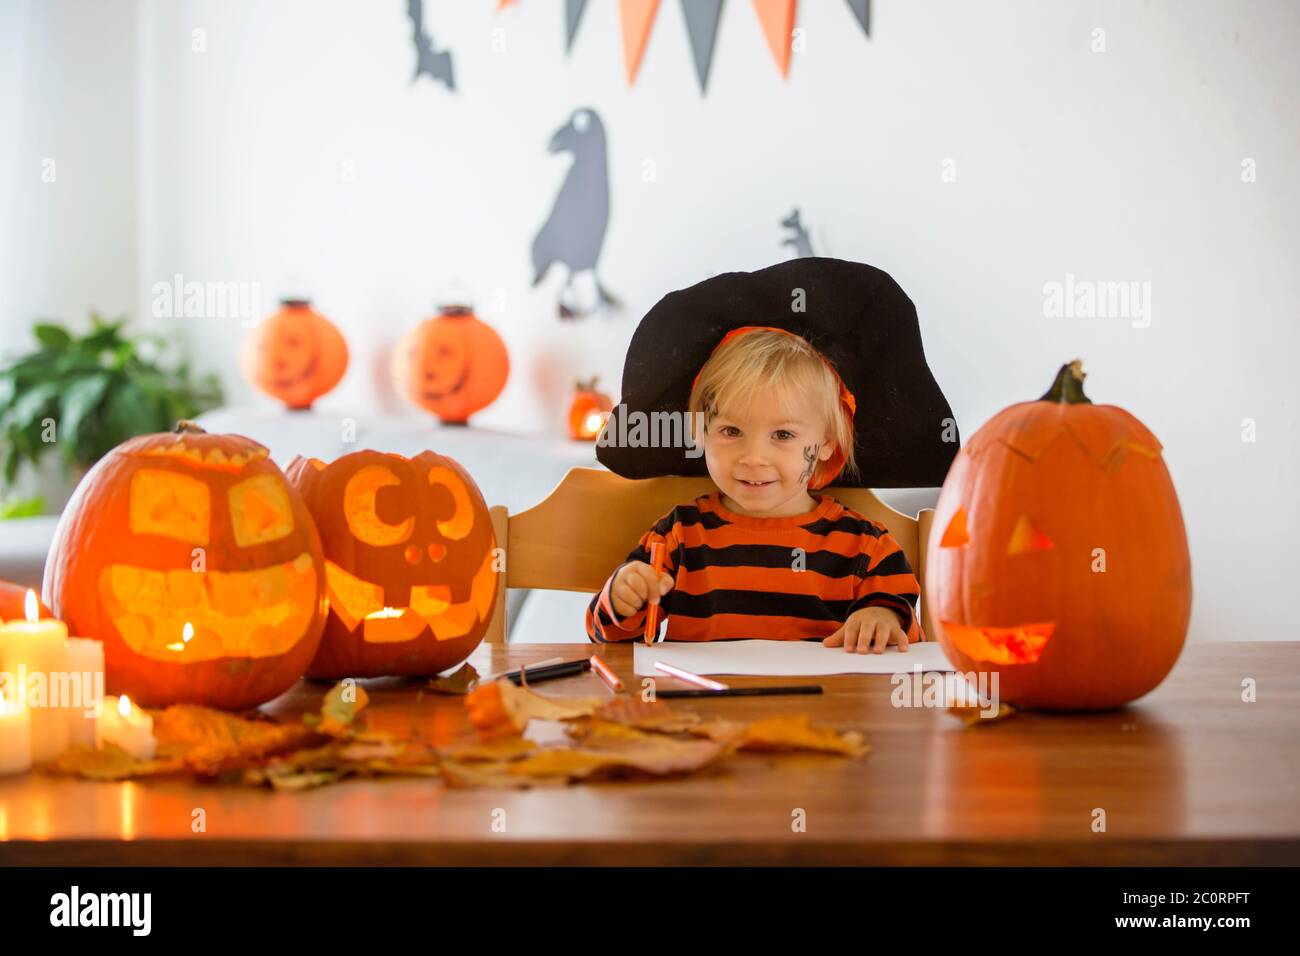 Child, toddler boy, drawing with pasteles pumpkin at home on Halloween, halloween carved pumpkin on the table, decoration on the wall Stock Photo